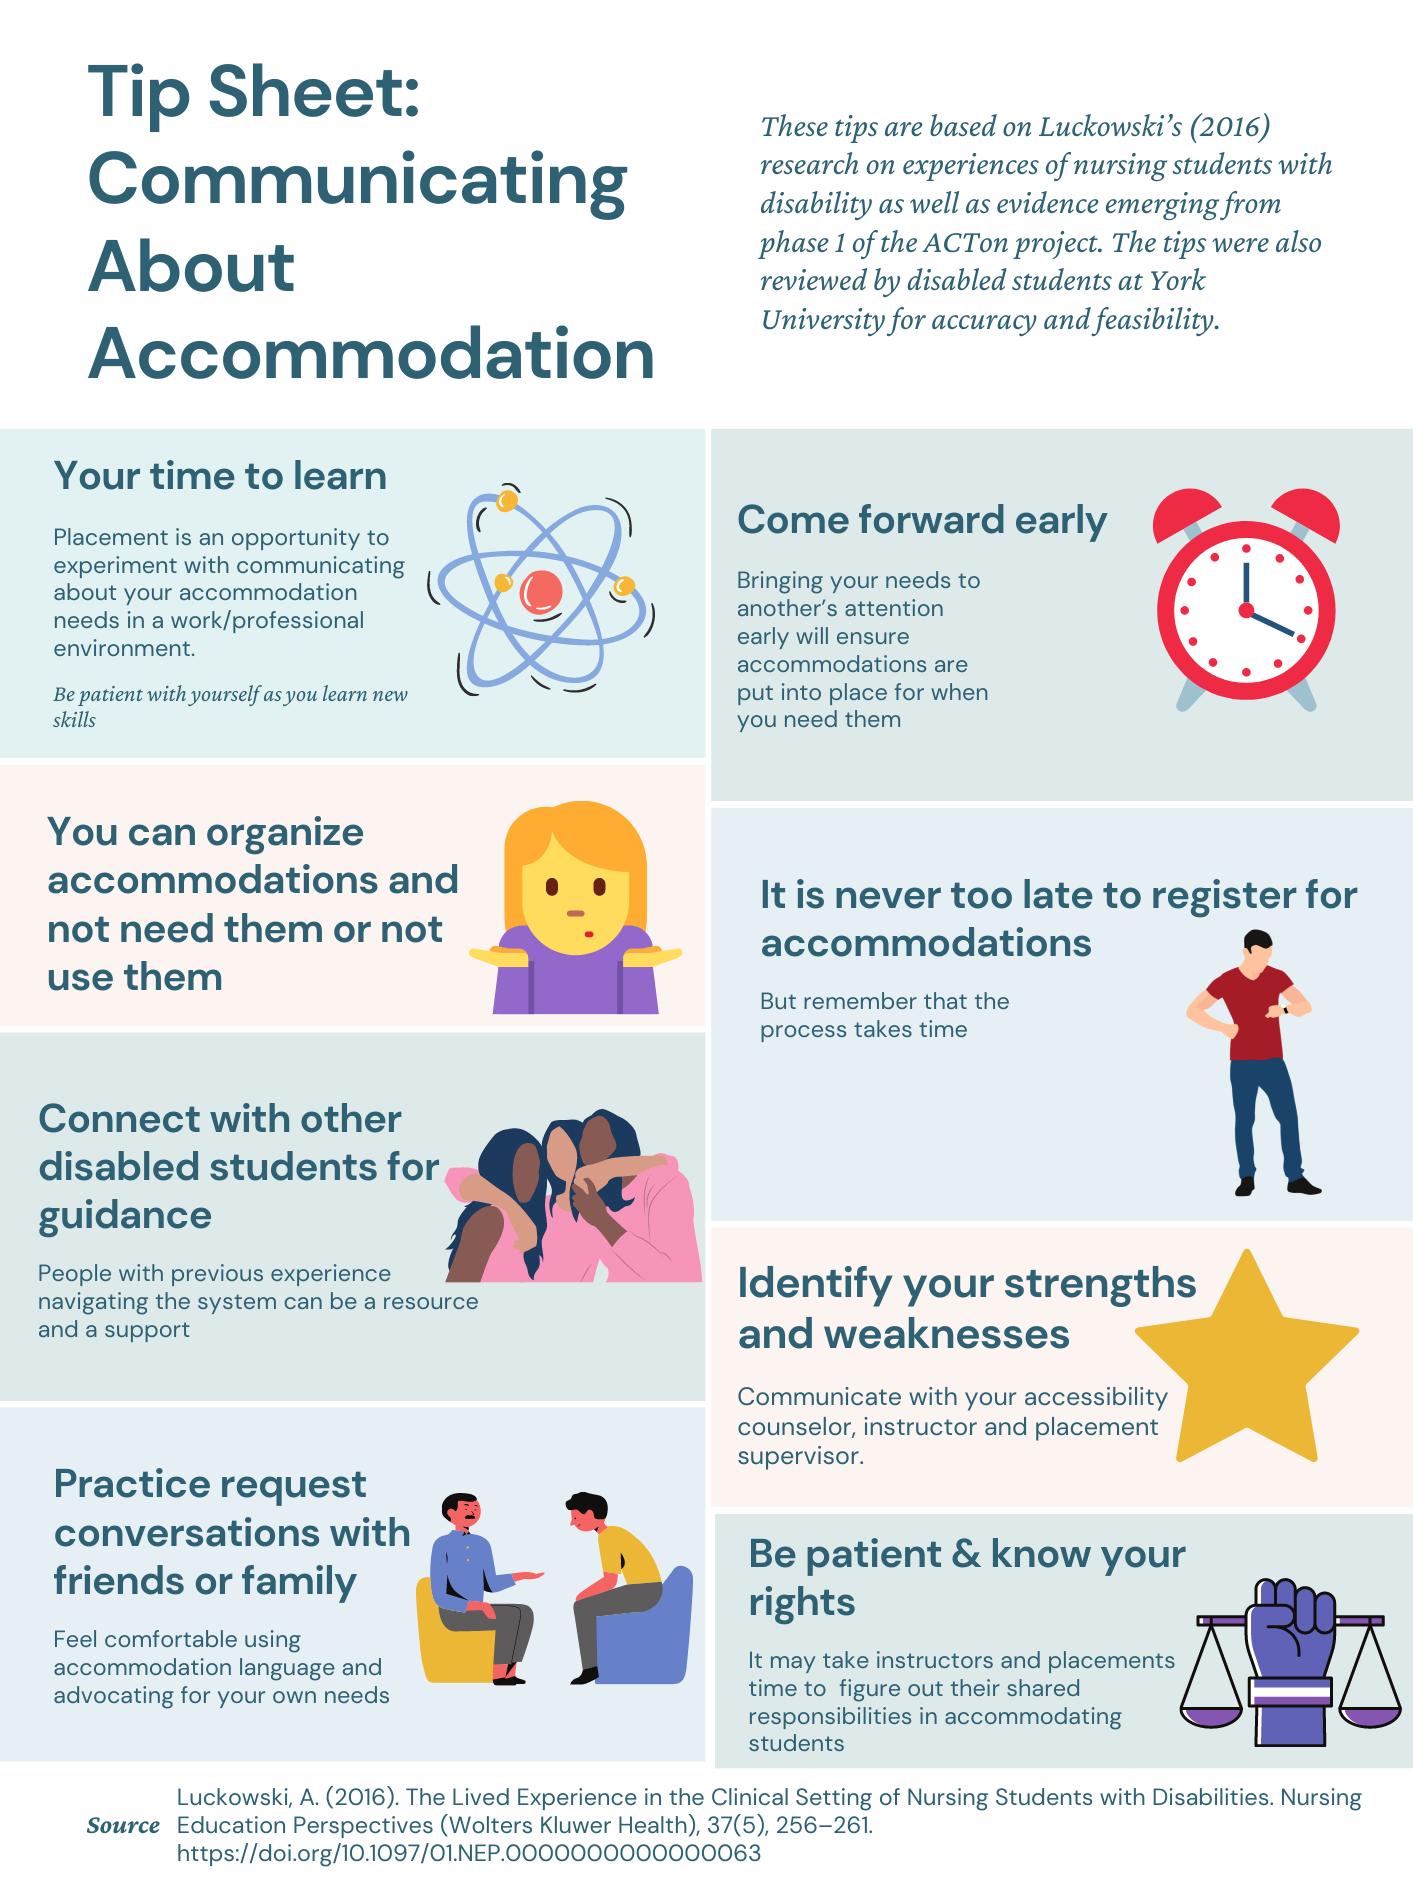 Student Tip Sheet: 1) This is Your time to learn. Placement is an opportunity to experiment with communicating about your accommodation needs in a work/professional environment. Be patient with yourself as you learn new skills. 2) Come forward early. Bringing your needs to another’s attention early will ensure accommodations are put into place for when you need them. 3) You can organize accommodations and not need them or not use them. 4) It is never too late to register for accommodations. But remember that the process takes time. 5) Connect with other disabled students for guidance. People with previous experience navigating the system can be a resource and a support. 6) Identify your strengths and weaknesses. Communicate with your accessibility counselor, instructor, and placement supervisor. 7) Practice request conversations with friends or family. Feel comfortable using accommodation language and advocating for your own needs. and 8) Be patient & know your rights. It may take instructors and placements time to figure out their shared responsibilities in accommodating students.